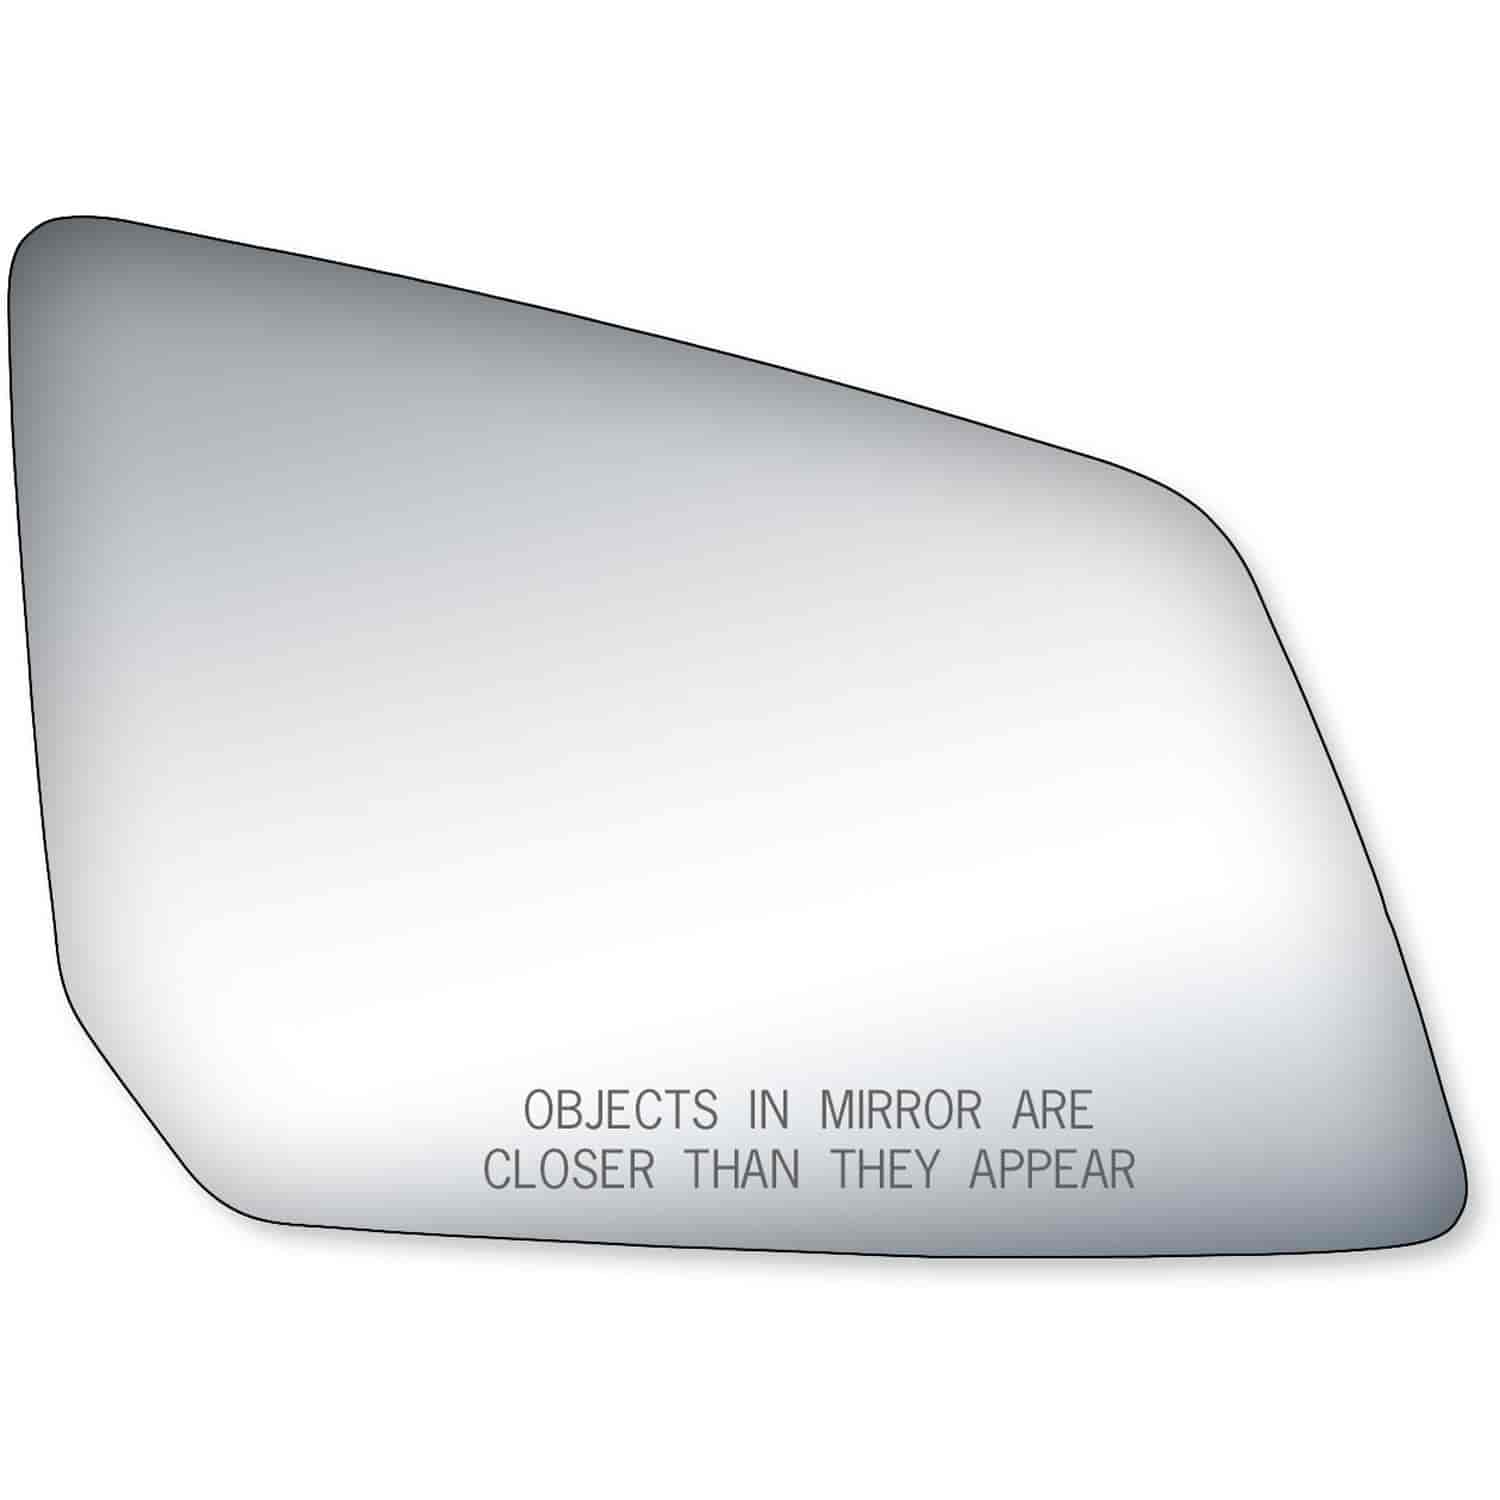 Replacement Glass for 09-14 Traverse w/out blind spot lens ; 07-13 Acadia w/out spot mirror ; 07-10